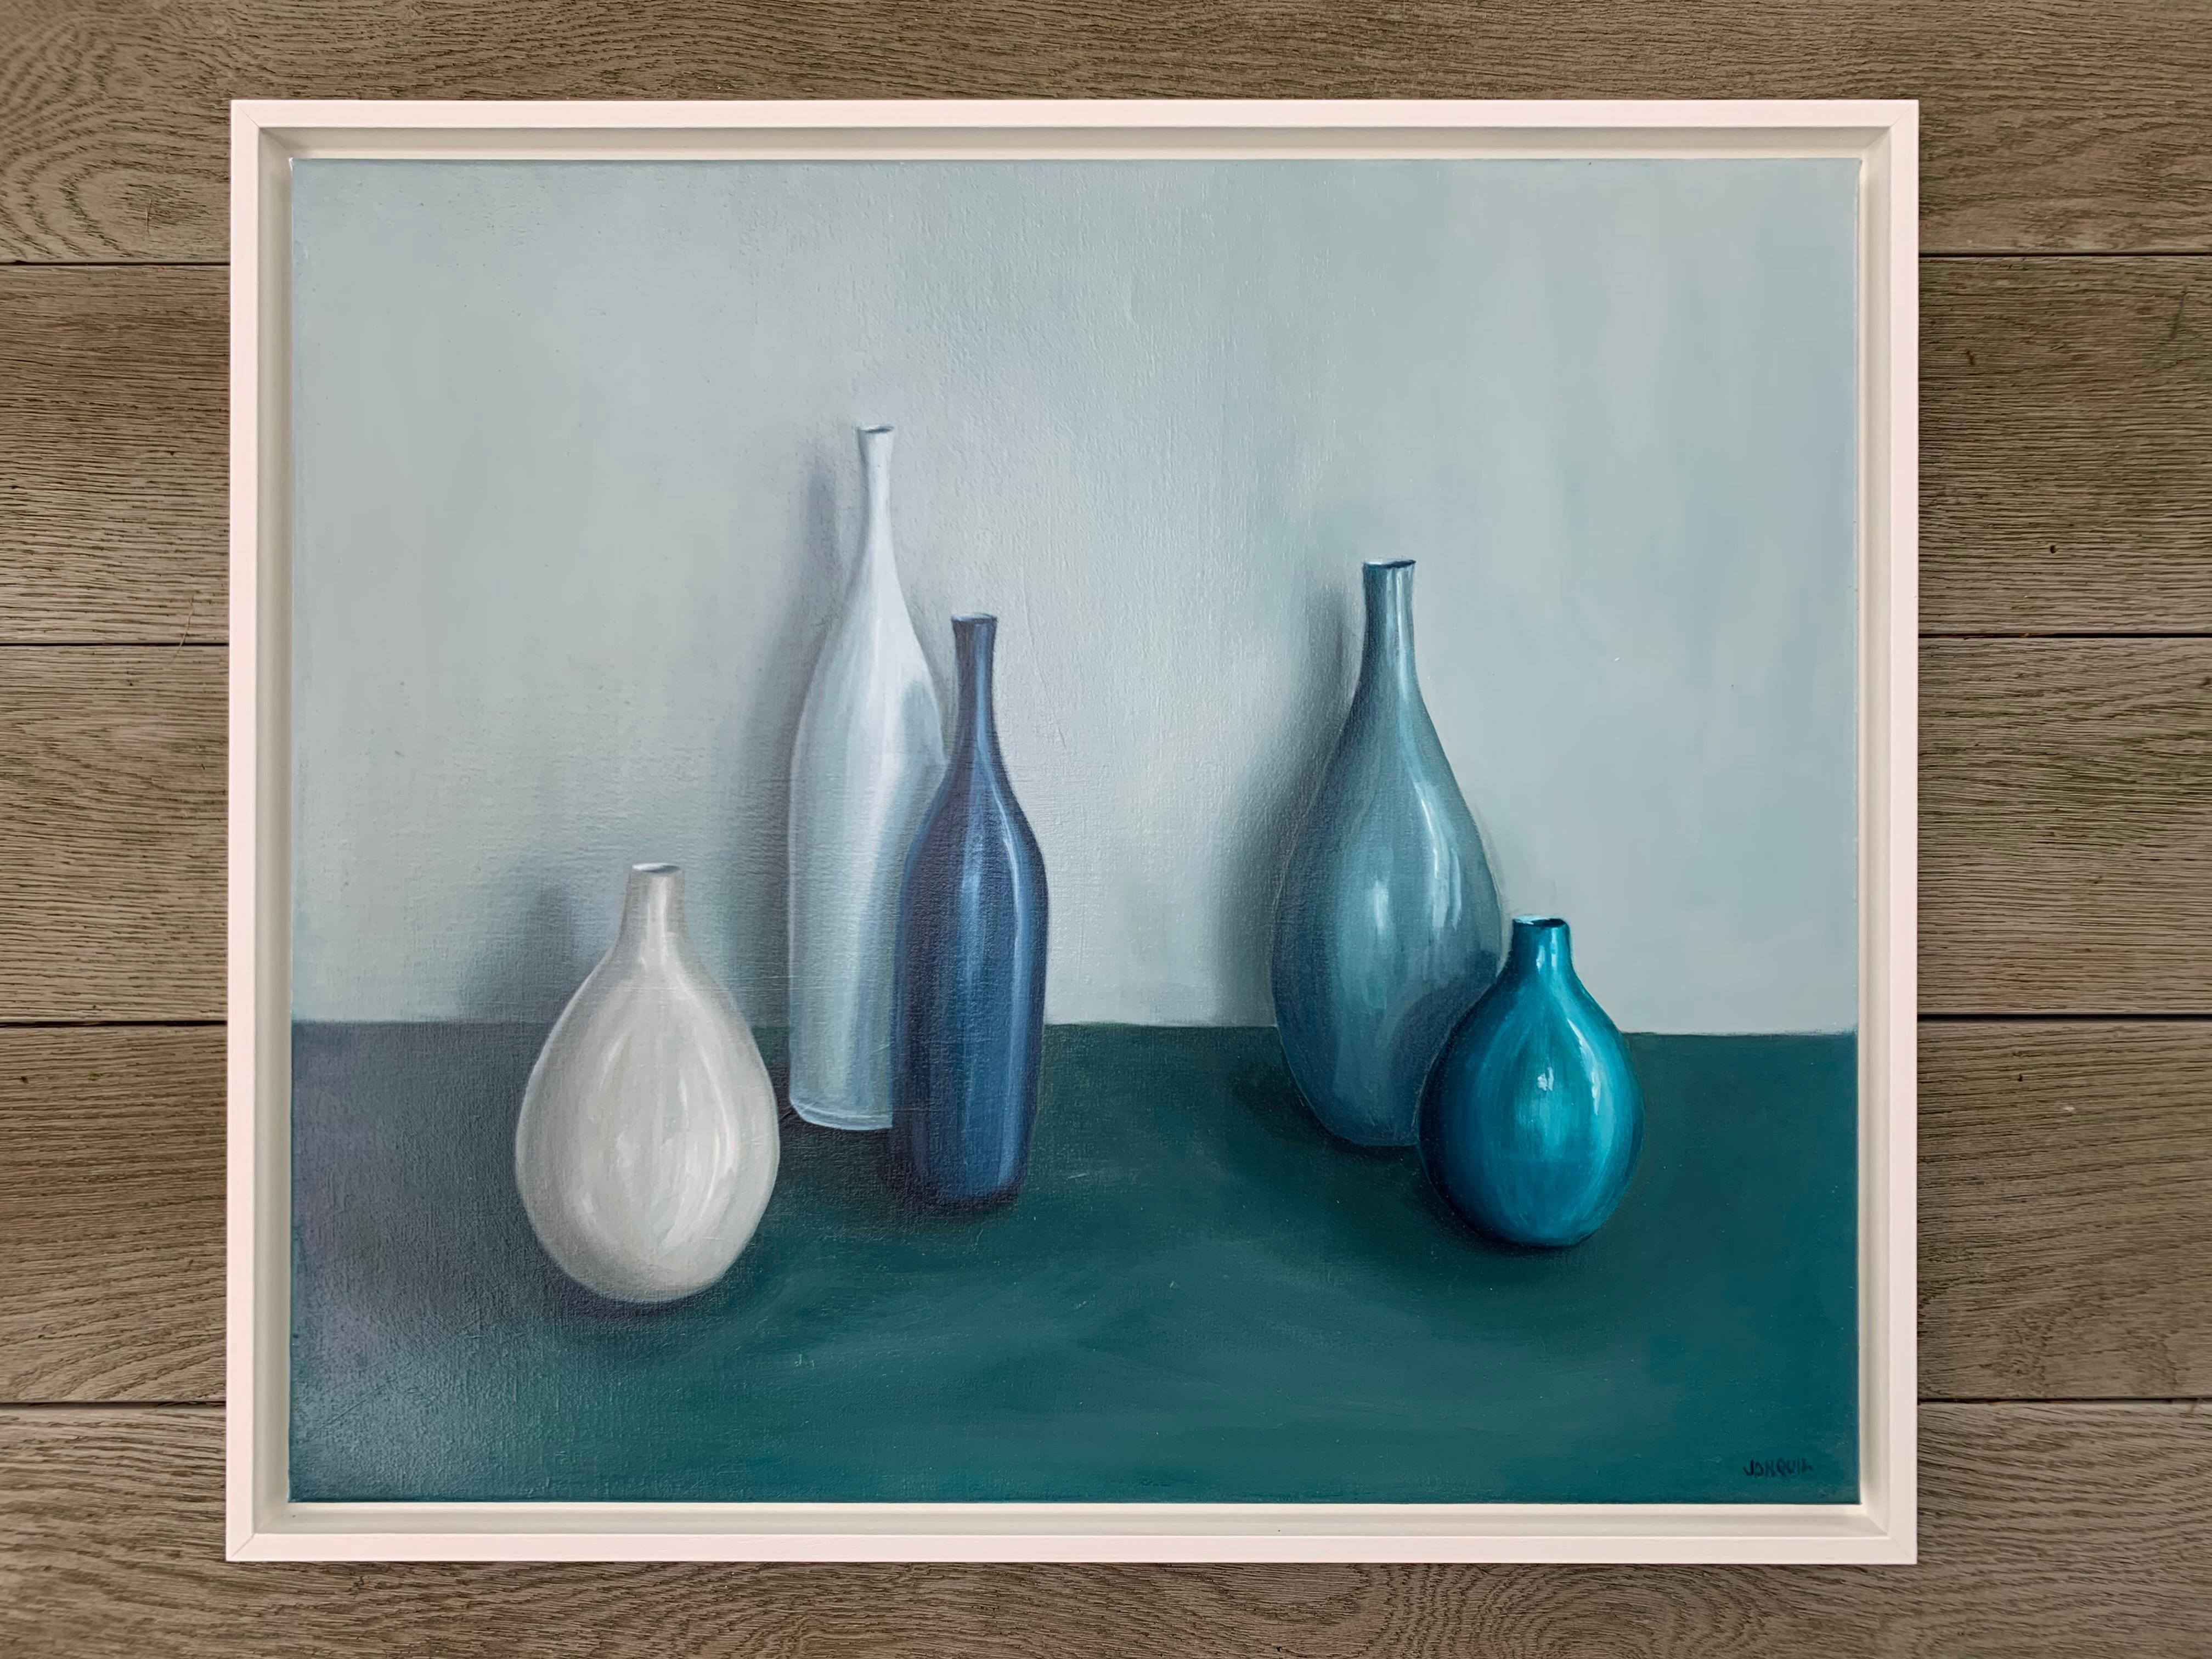 A blue and grey family of pots. The colours are serene and calming. The painting is created with a limited palette for tonal harmony.   Oil on canvas framed in painted white frame.


ABOUT JONQUIL WILLIAMSON
Jonquil Williamson is a British artist